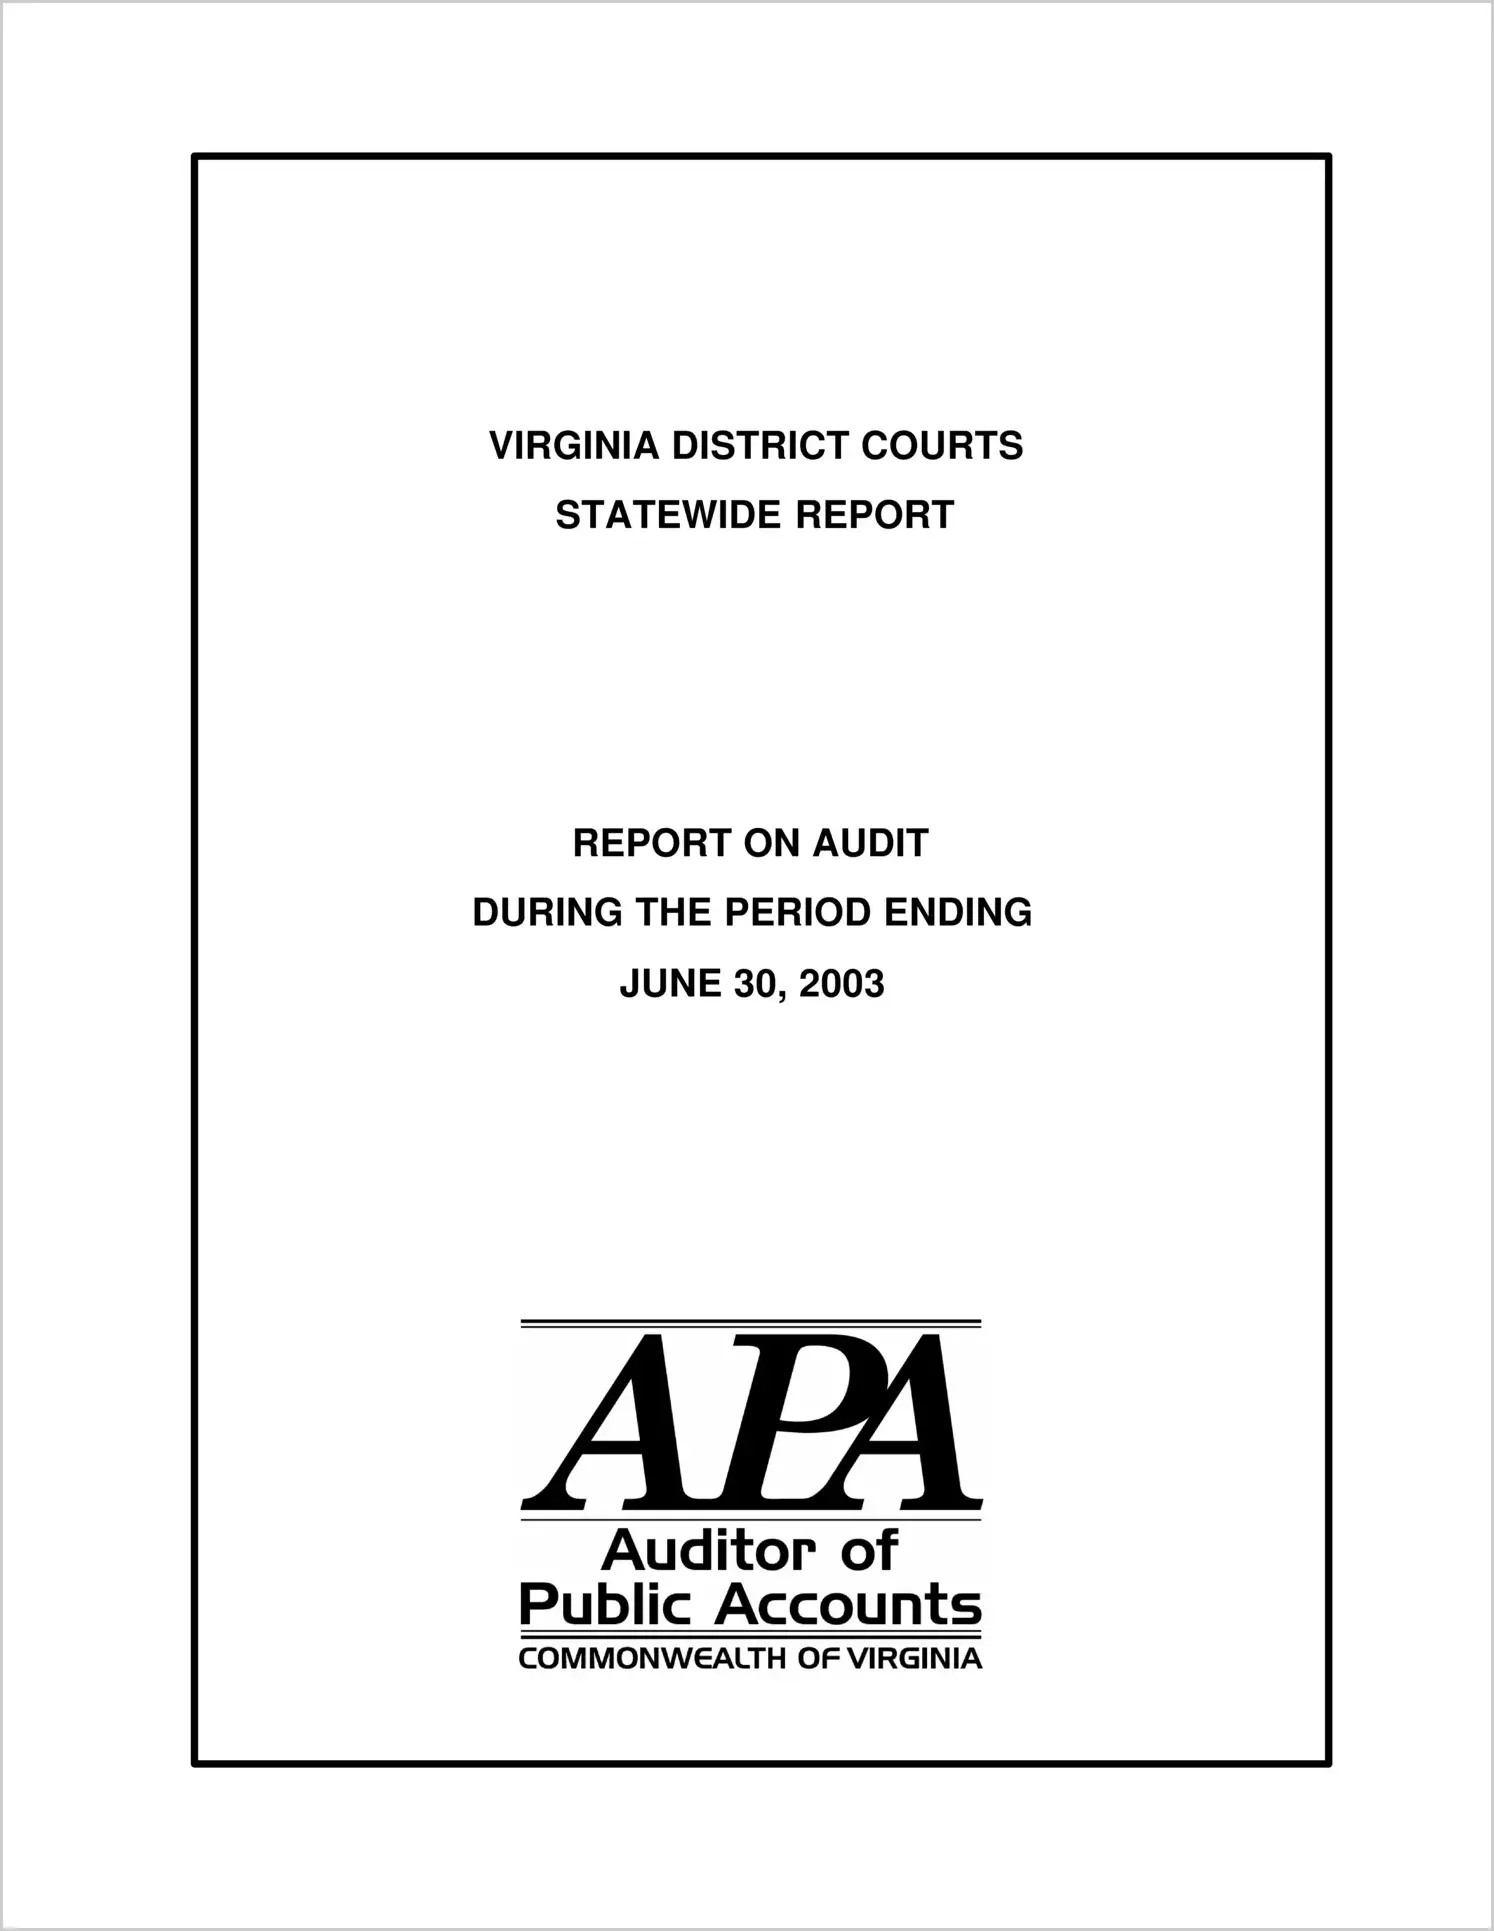 Virginia District Courts Statewide Report during the period ending June 30, 2003